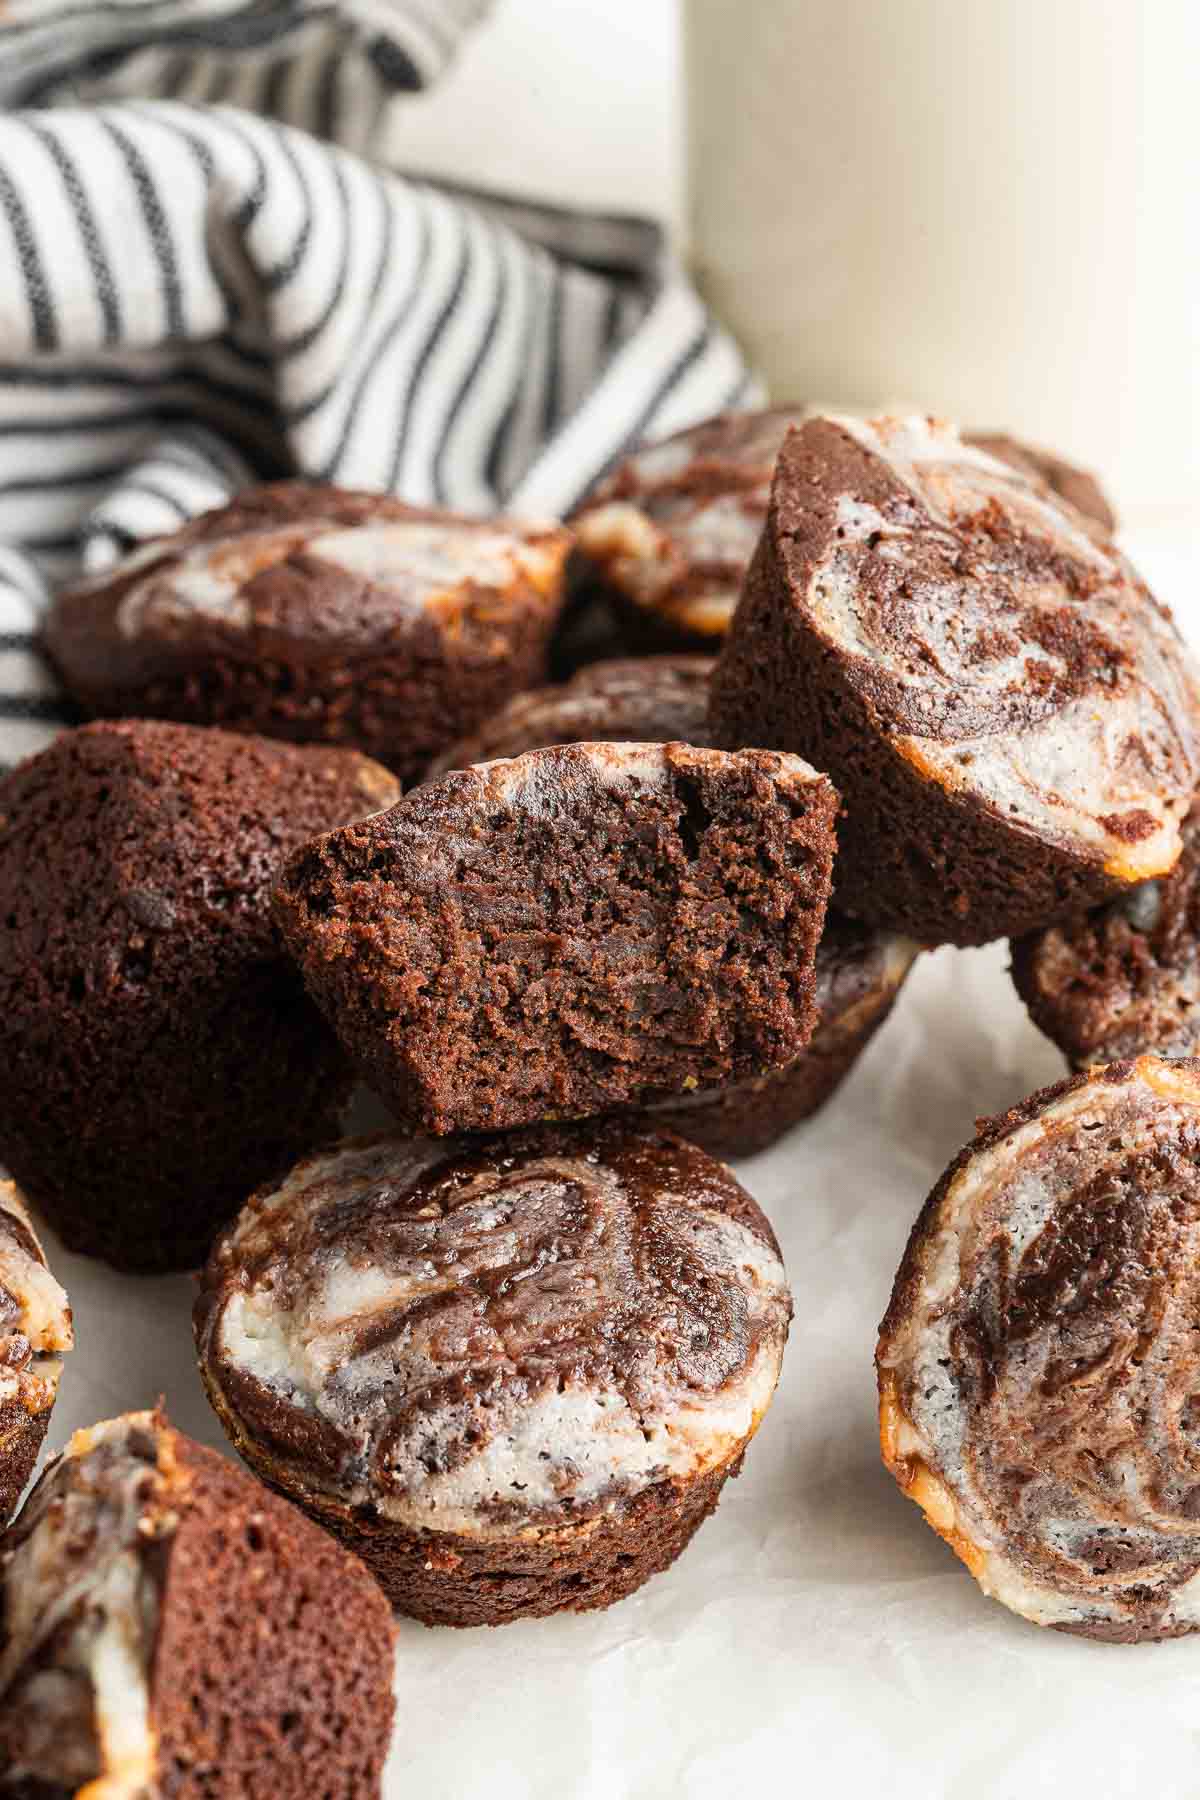 Cheesecake brownie bites piled up with one cut in half to show fudginess inside.